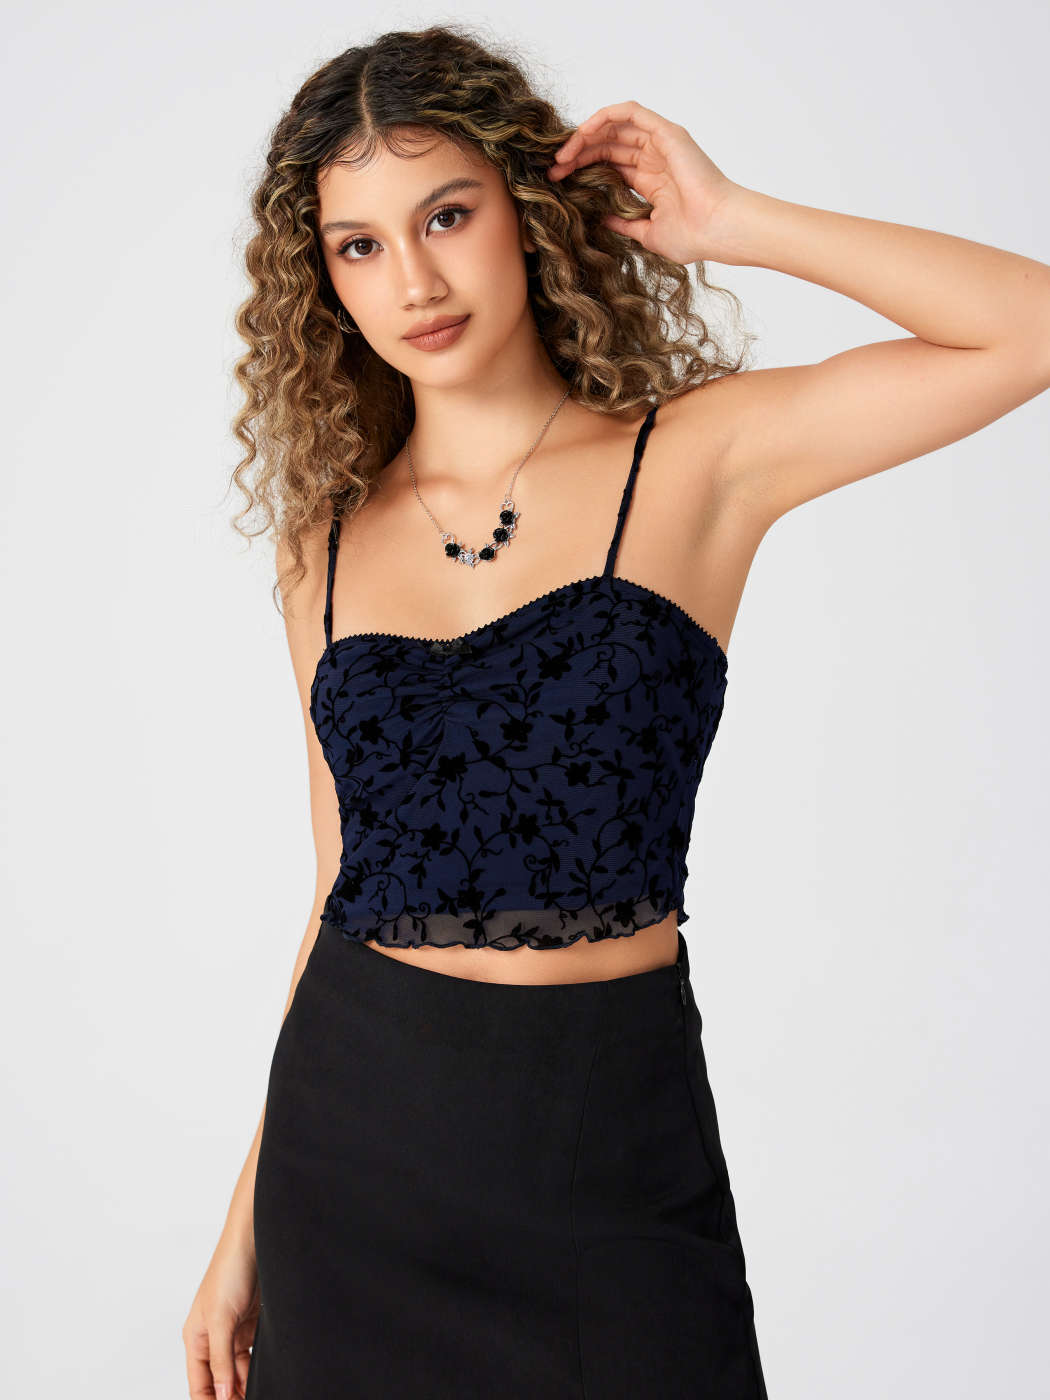 Ruched Mesh Cami Top in Black